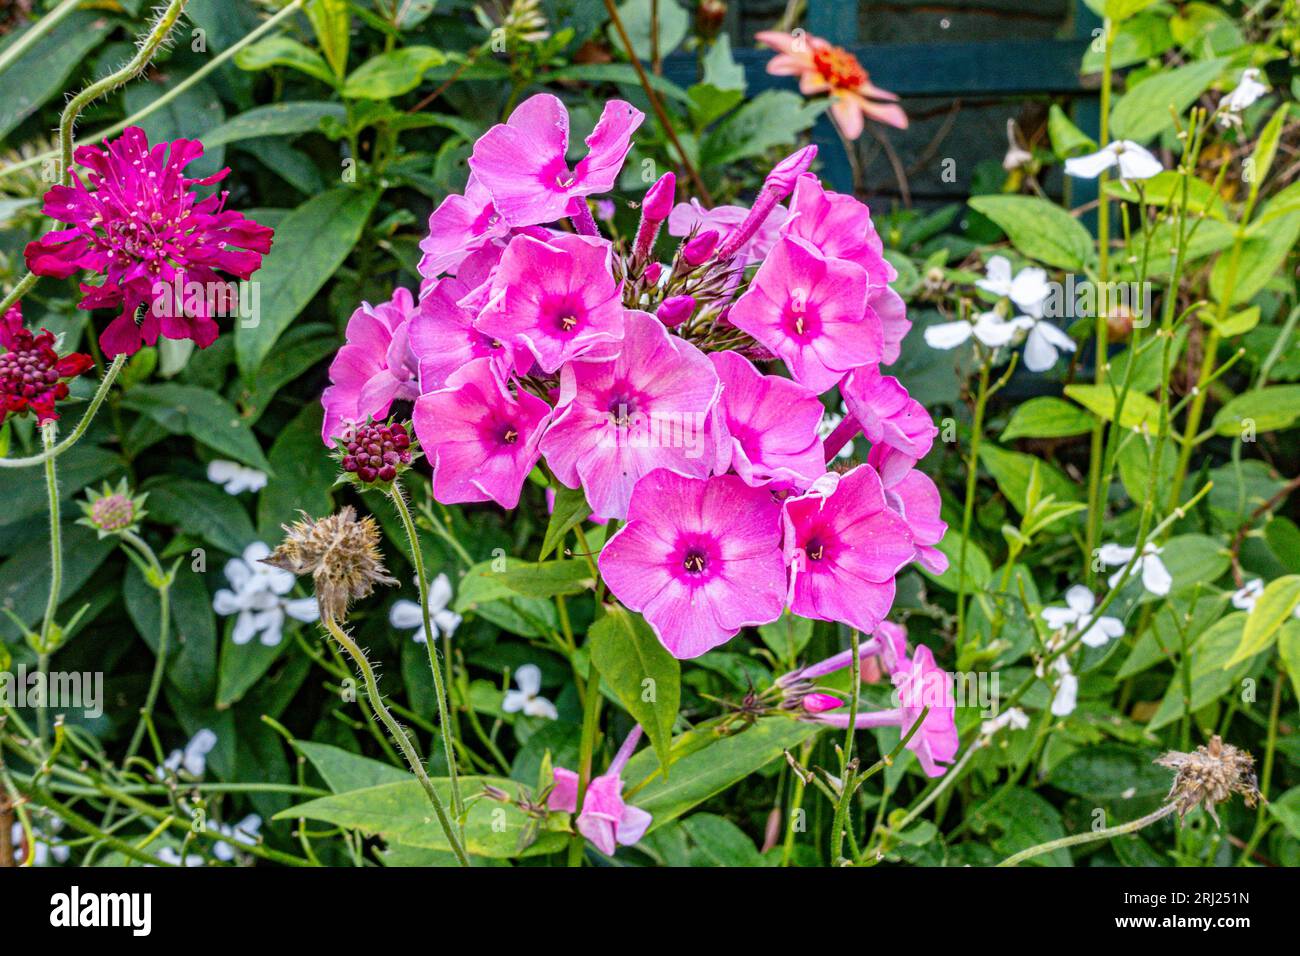 A pink phlox herbaceous perennial plant flowering in a garden Stock Photo